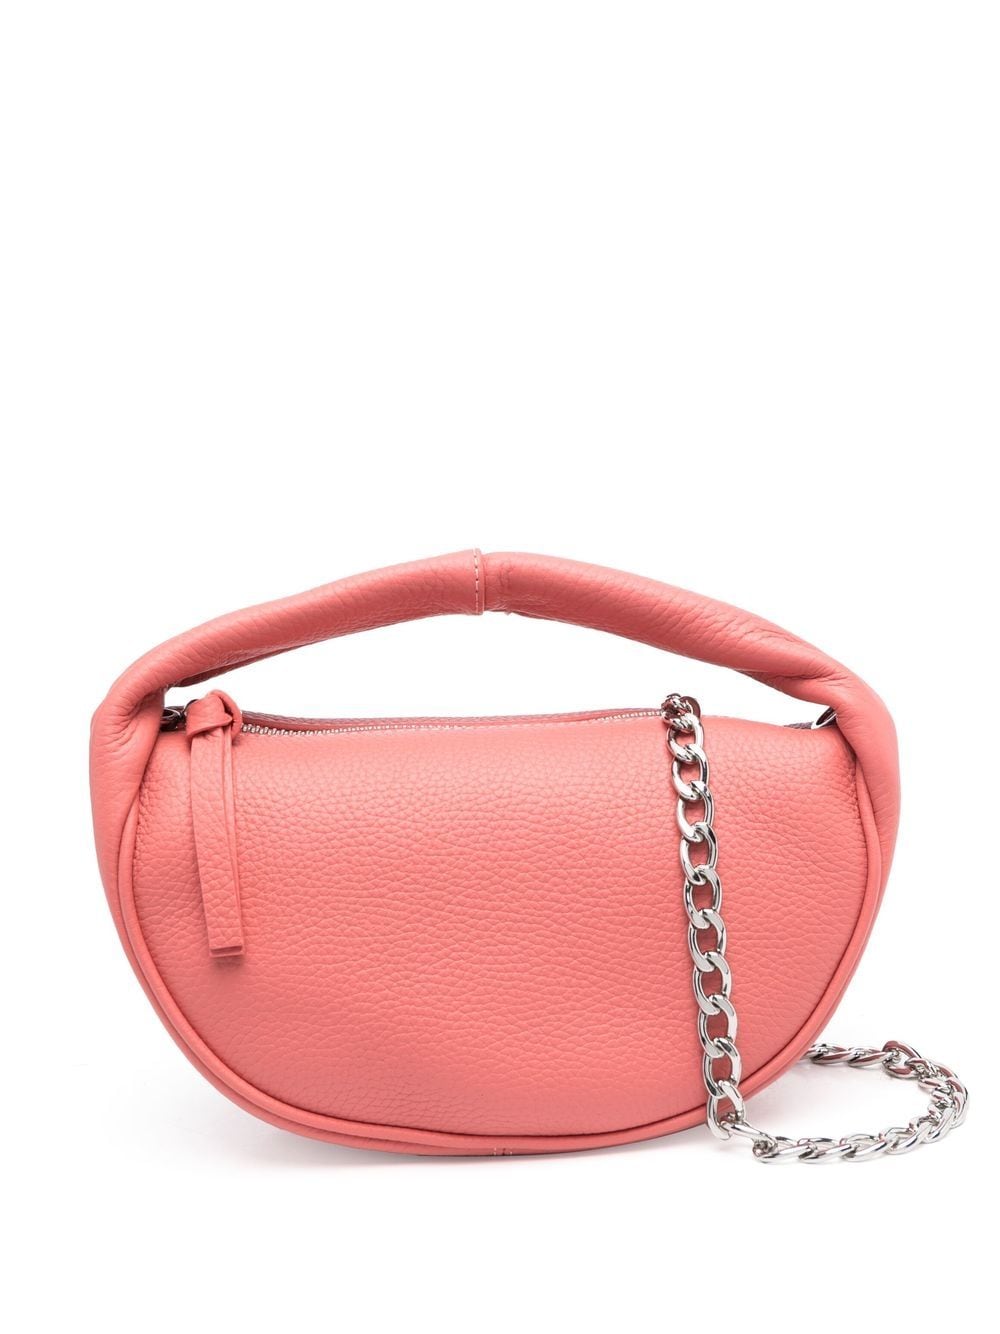 BY FAR textured-leather tote bag - Pink von BY FAR